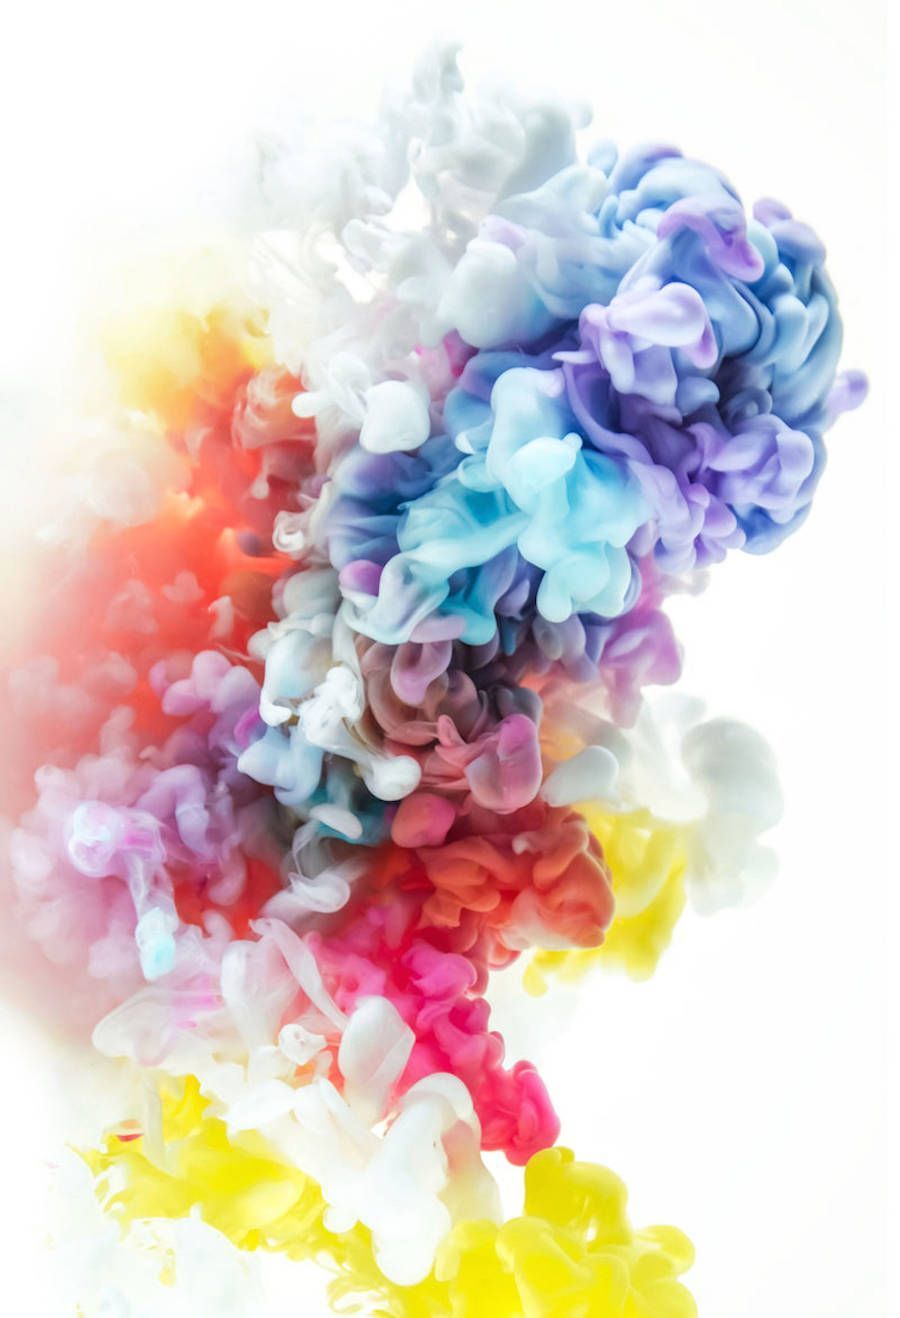 Ink Explosion Wallpaper Free Ink Explosion Background